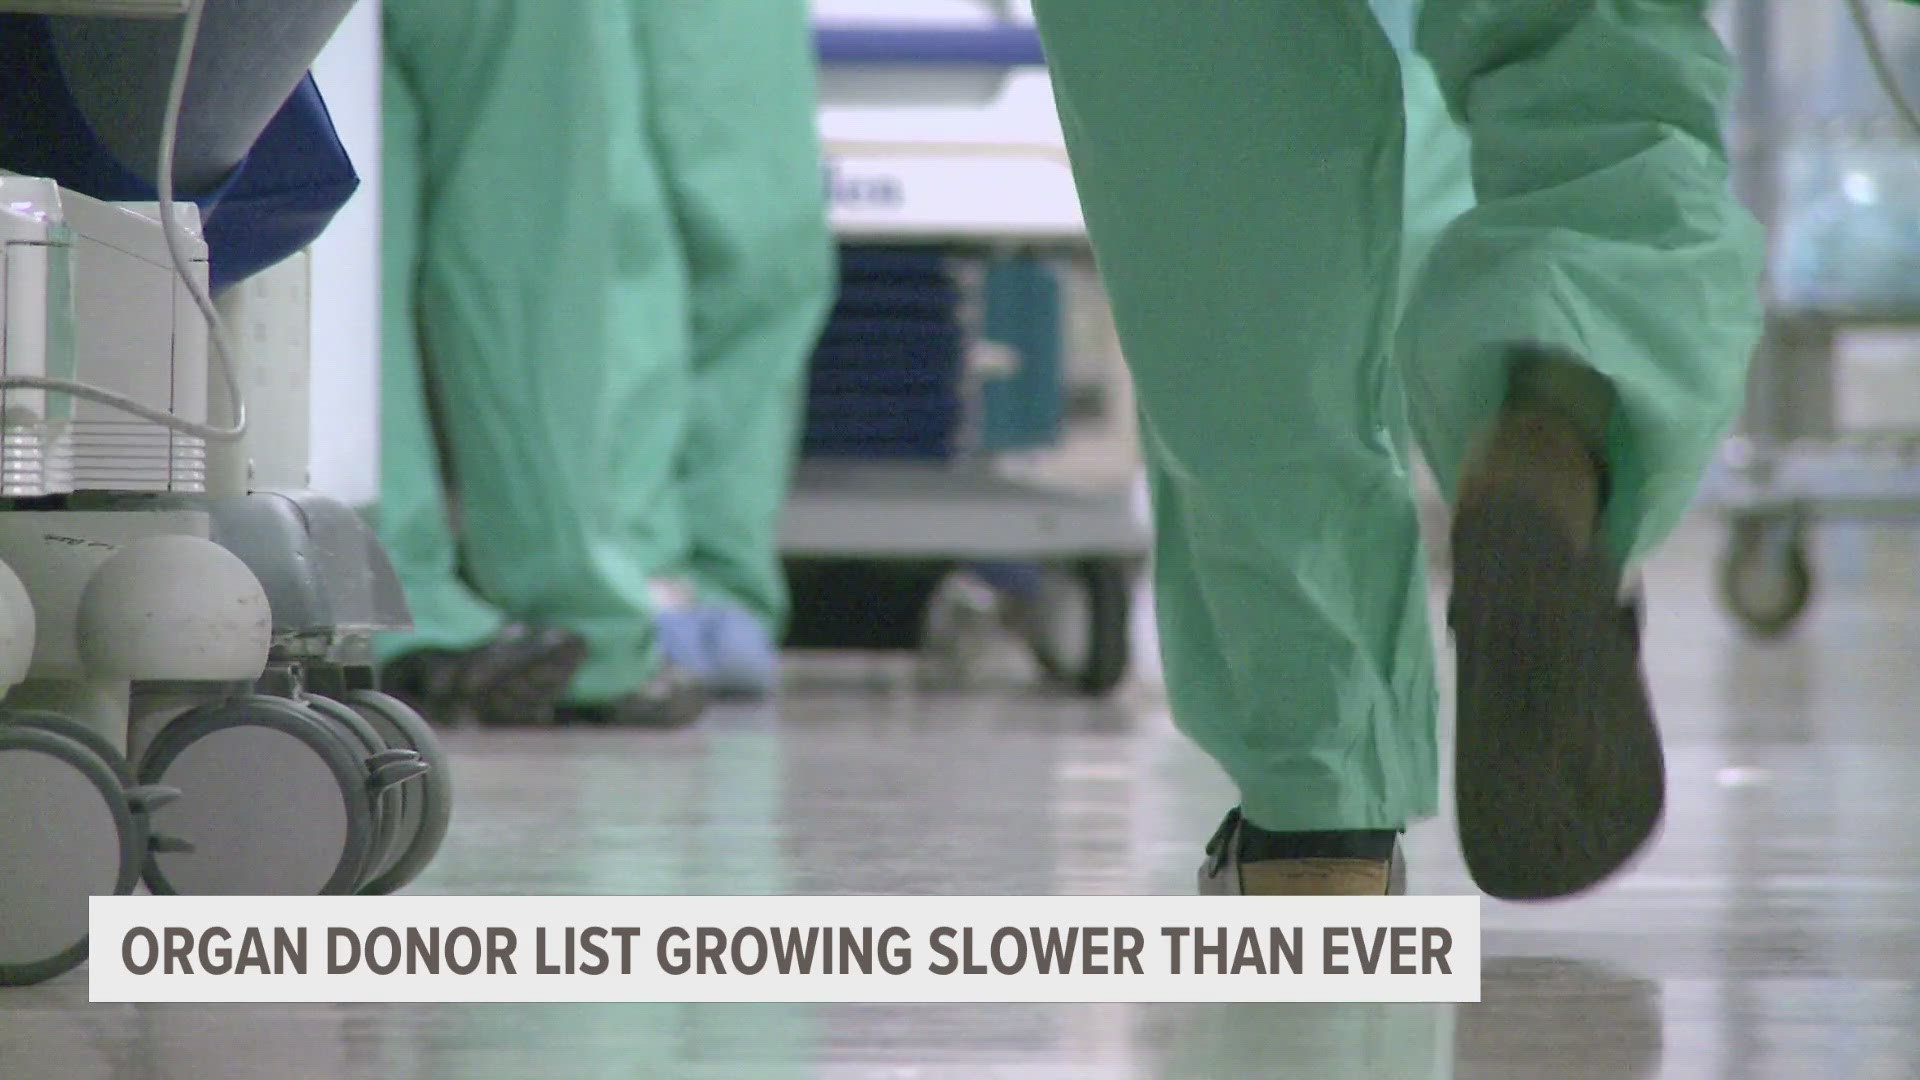 Organ donor list is growing slower than ever